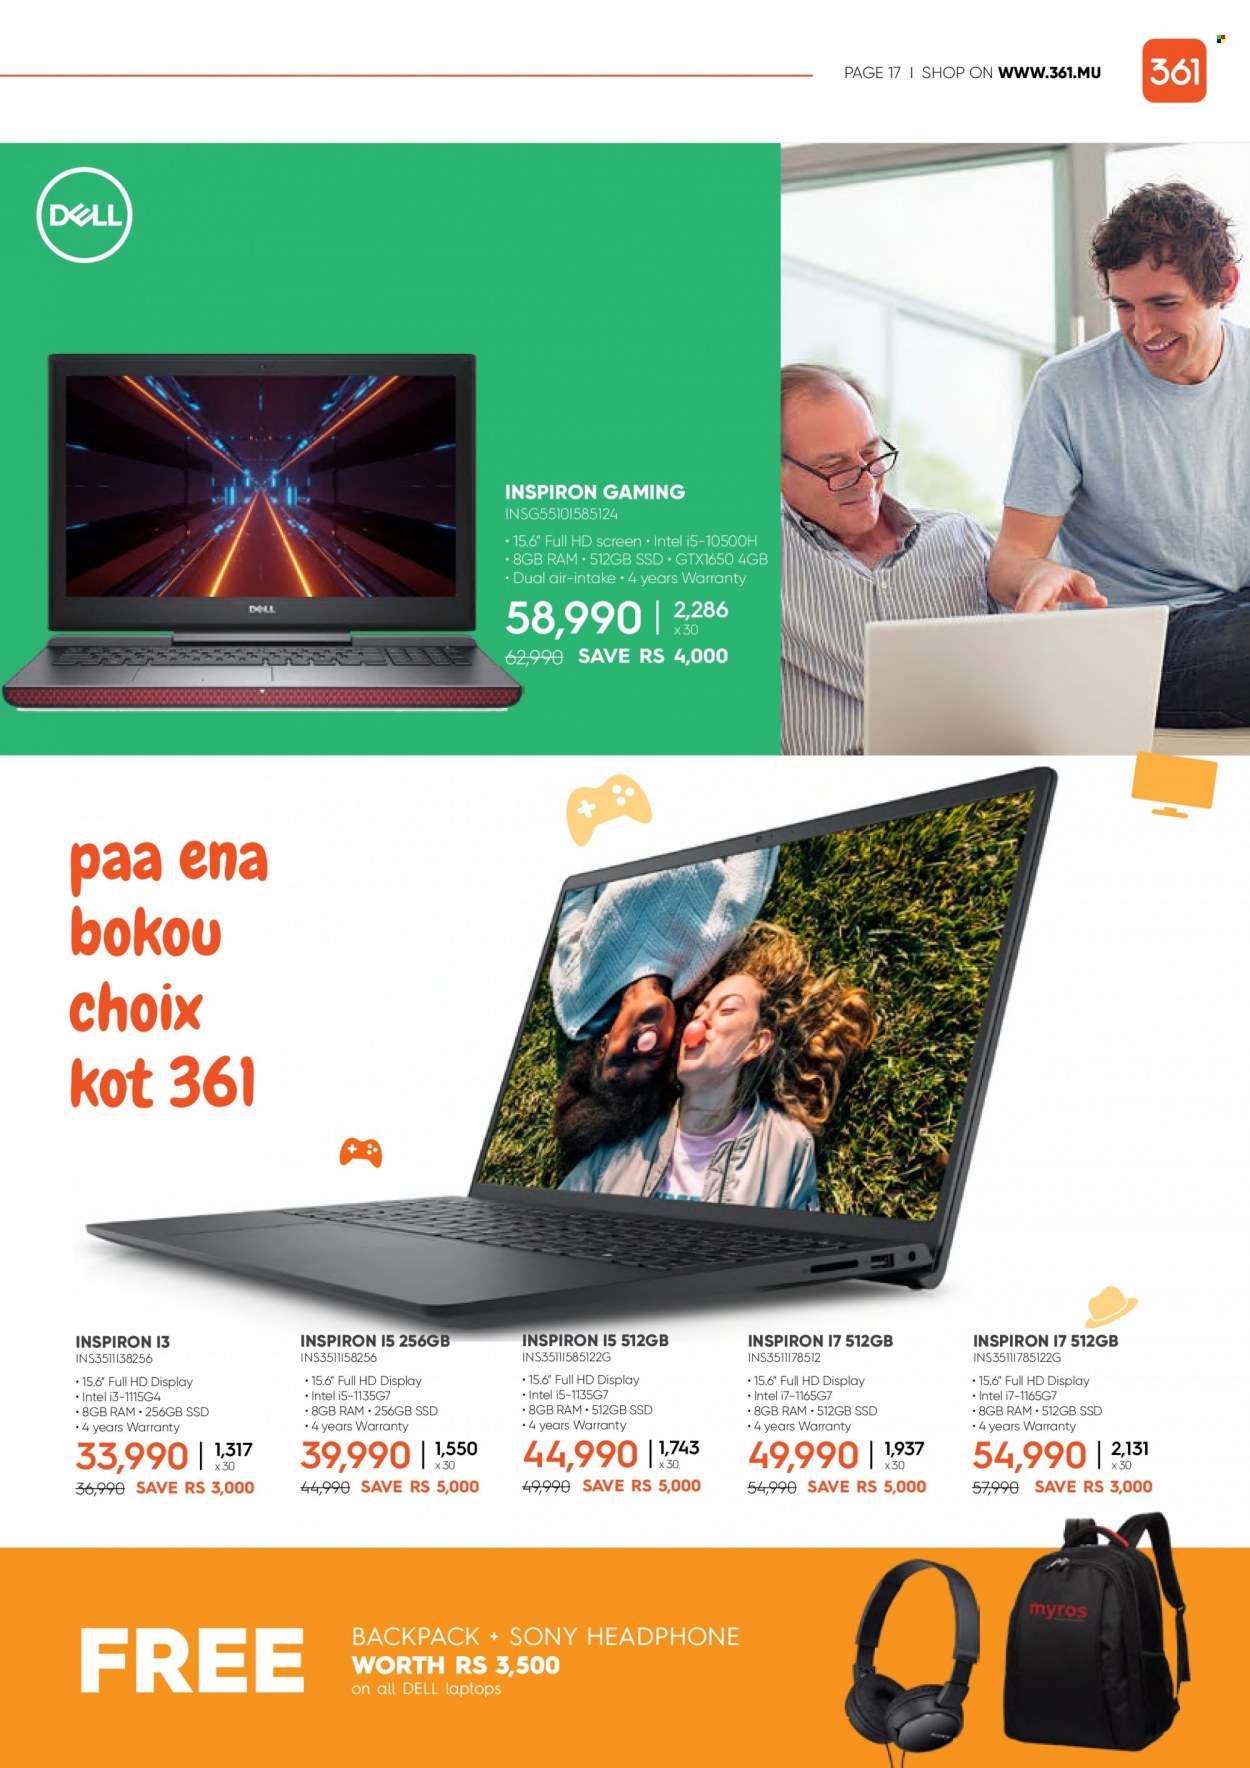 thumbnail - 361 Catalogue - 14.06.2022 - 23.06.2022 - Sales products - Sony, Intel, laptop, Inspiron, headphones, Dell. Page 17.